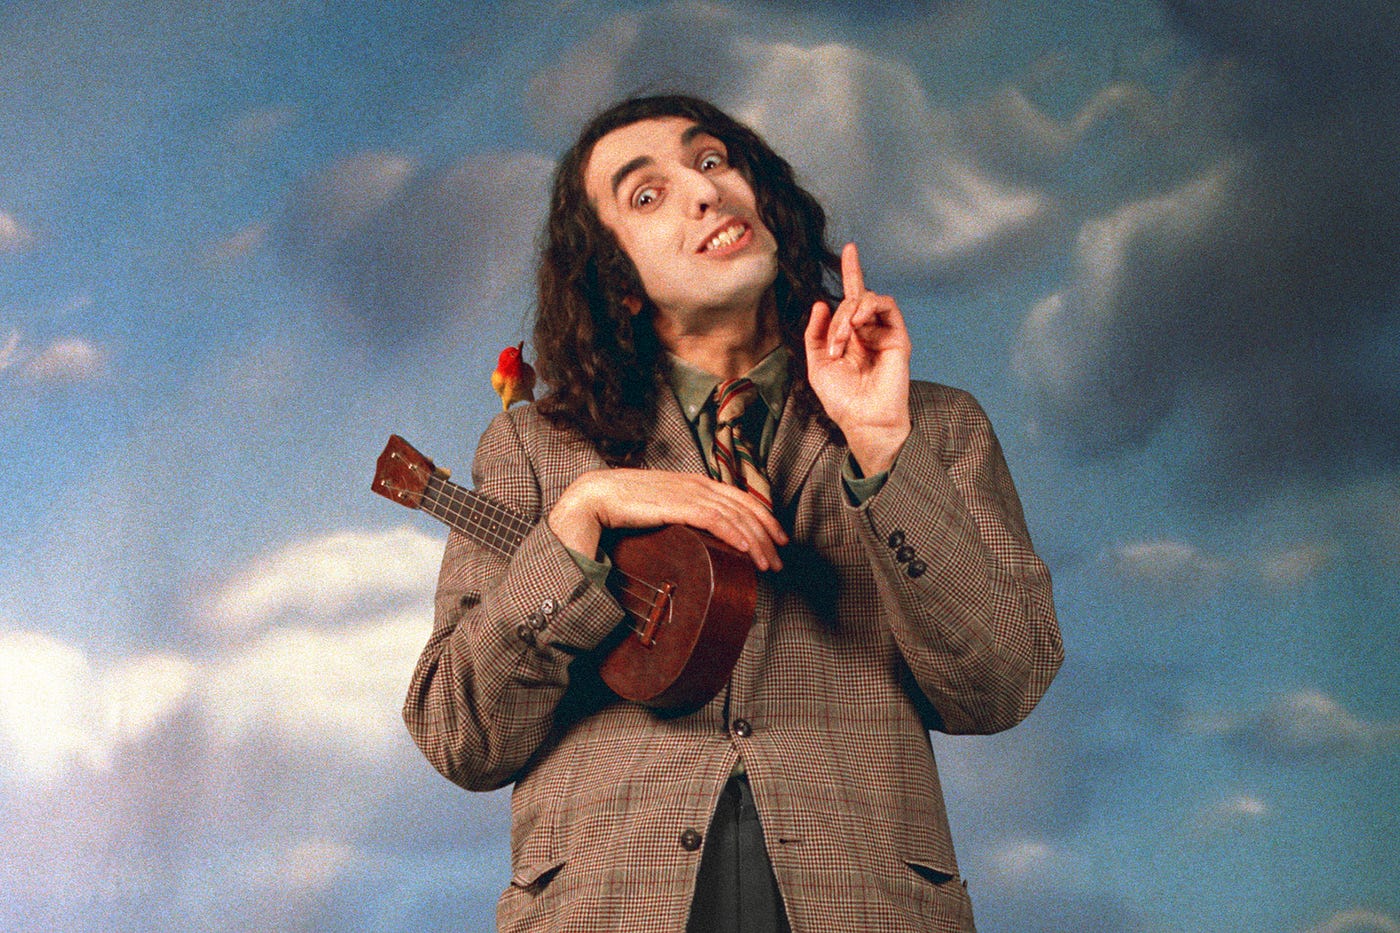 Tiny Tim - The Quirky Crooner Of The 1960s